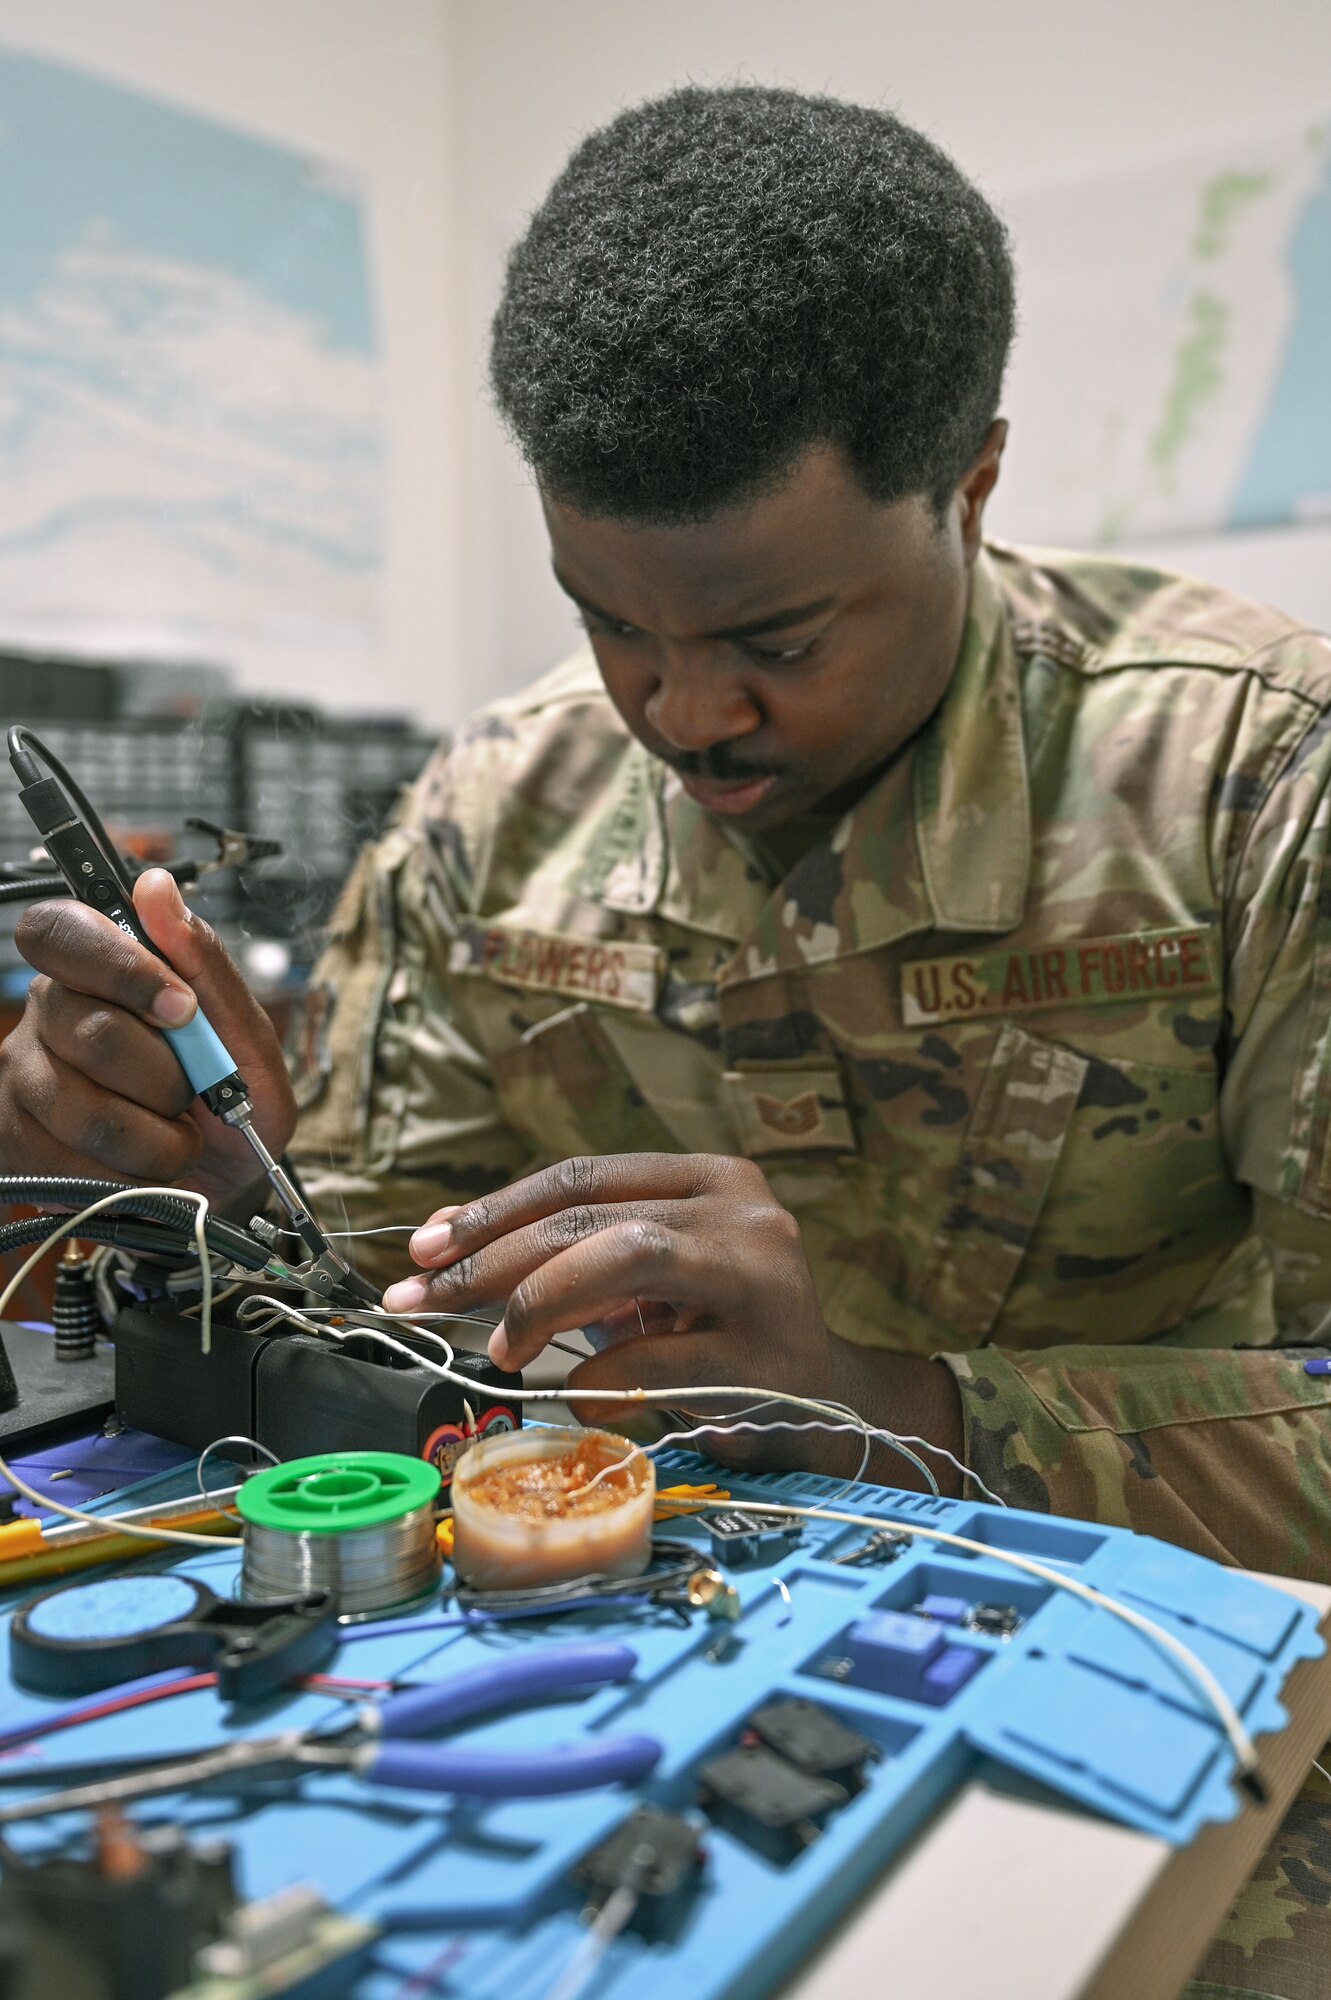 Technical Sgt. Malik Flowers, an installation spectrum manager with Task Force 99, solders components at the TF 99 lab at Al Udeid Air Base, Qatar, November 18, 2022. TF99 recruits Airmen from all career fields, who are technologically inventive and have creative mindsets. (U.S. Air Force photo by Senior Airman Micah Coate)